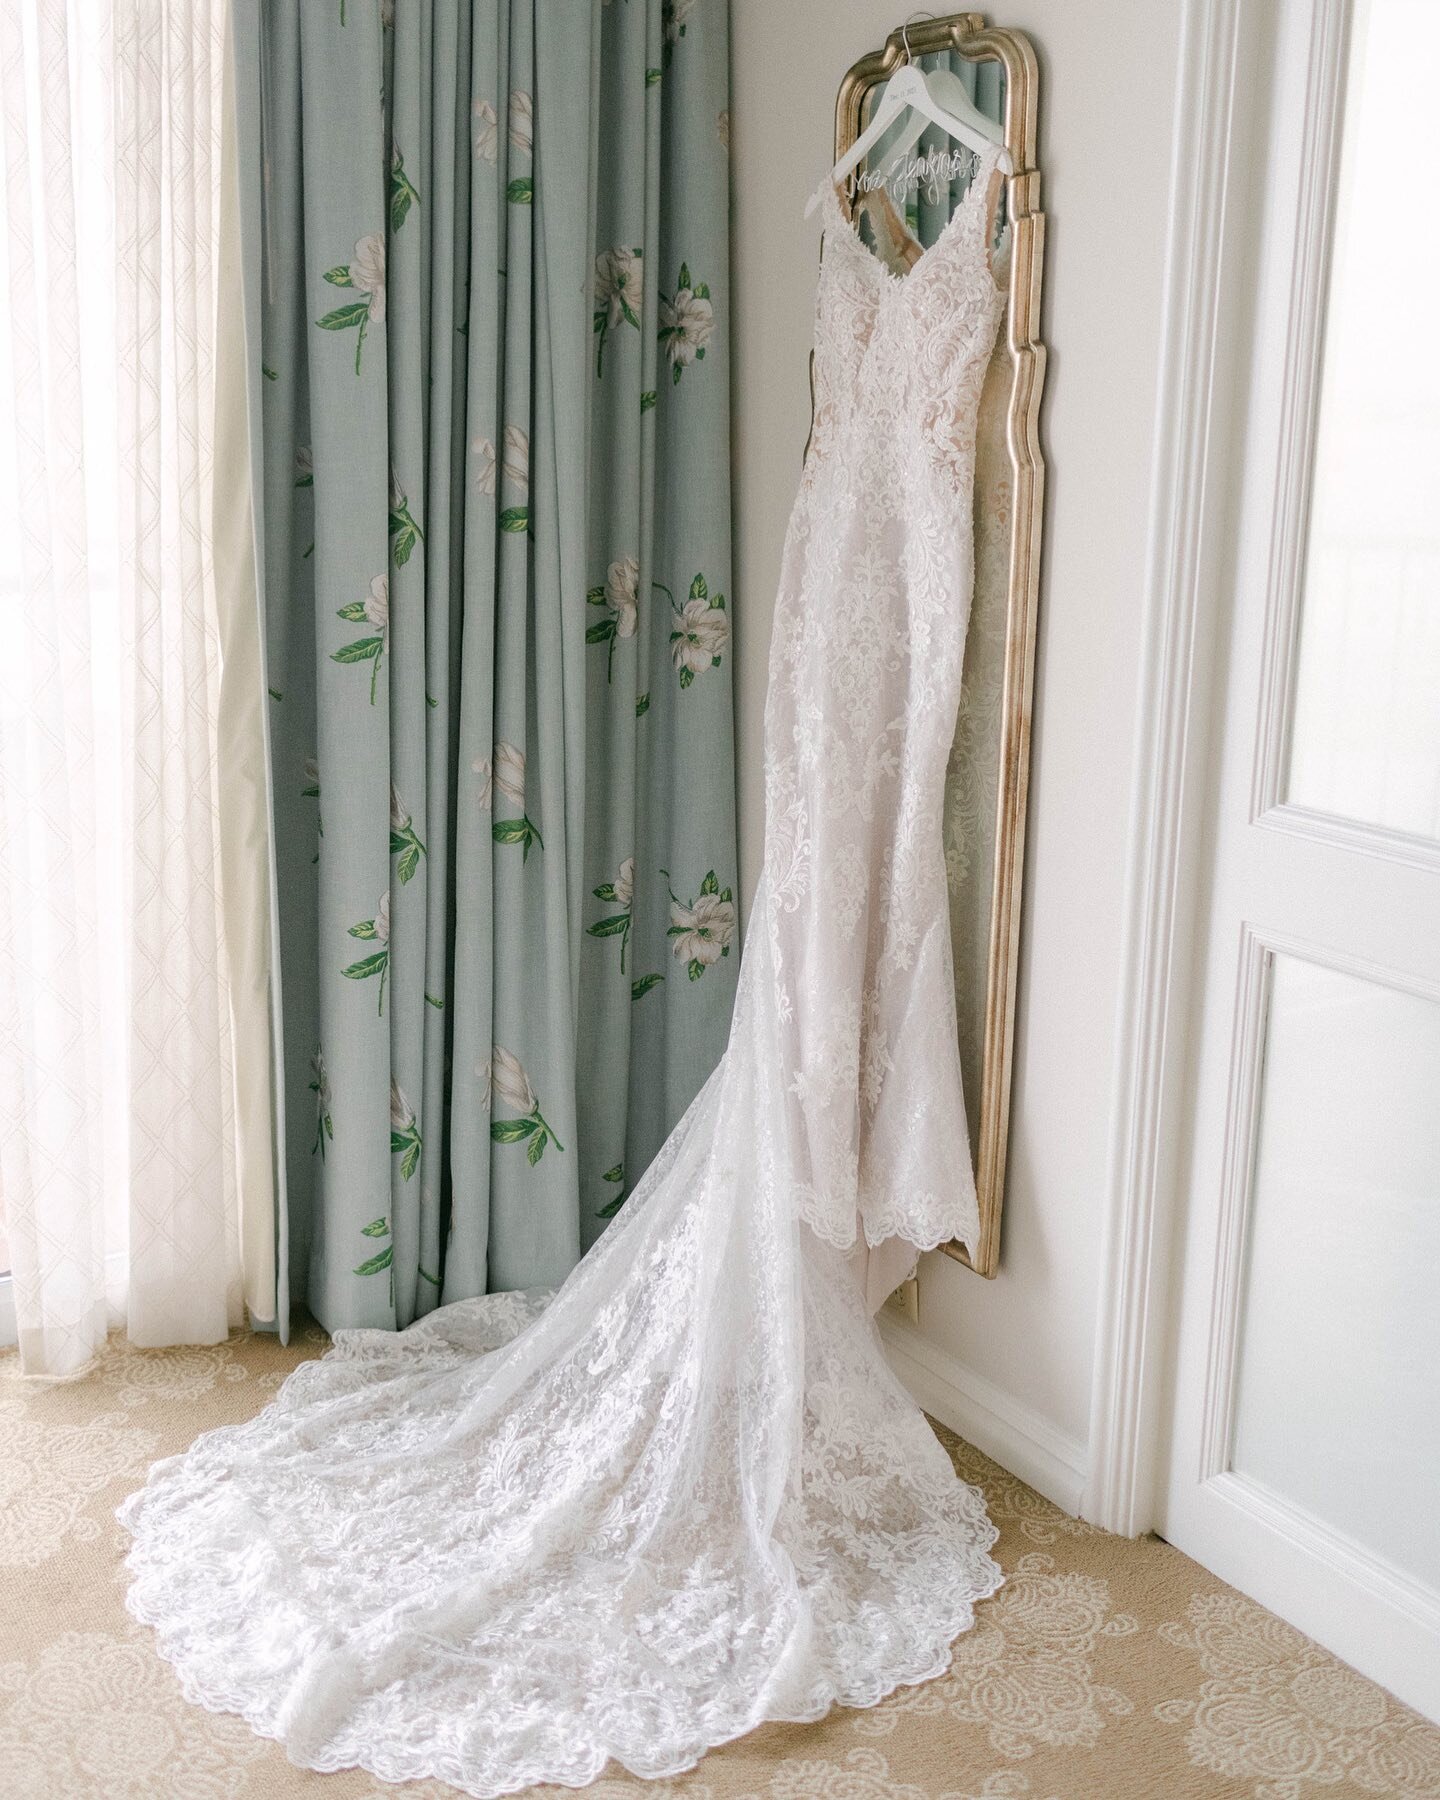 Let&rsquo;s hear it for the dress👏🏼😍

Had the best time coordinating this beautiful New Orleans wedding. More photos coming soon! 🤍✨

📸: @emilysongerphoto 
📍: Windsor Court Hotel
👗: @oliviercouturebridal design by @maggiesotterodesigns